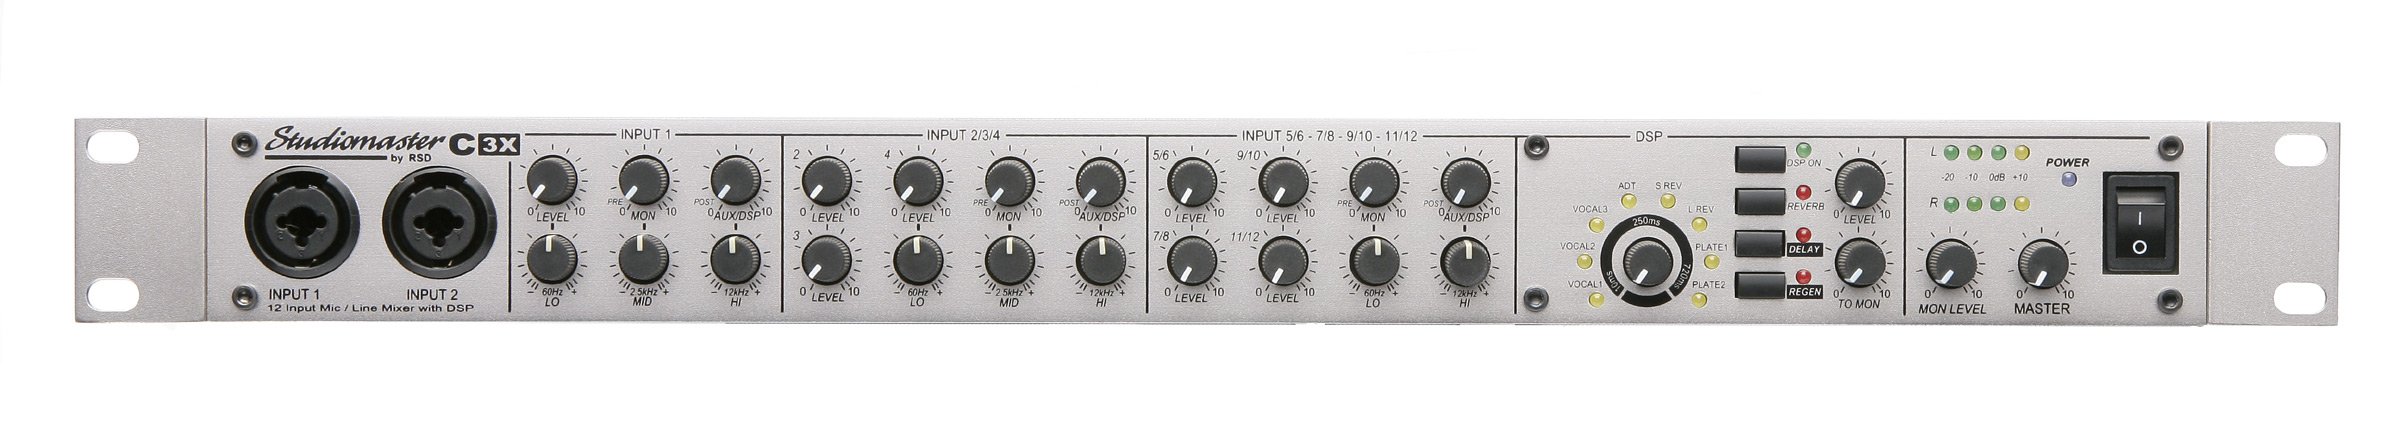 Studiomaster C3X 12ch Mixer with Effects 1u Rack Front